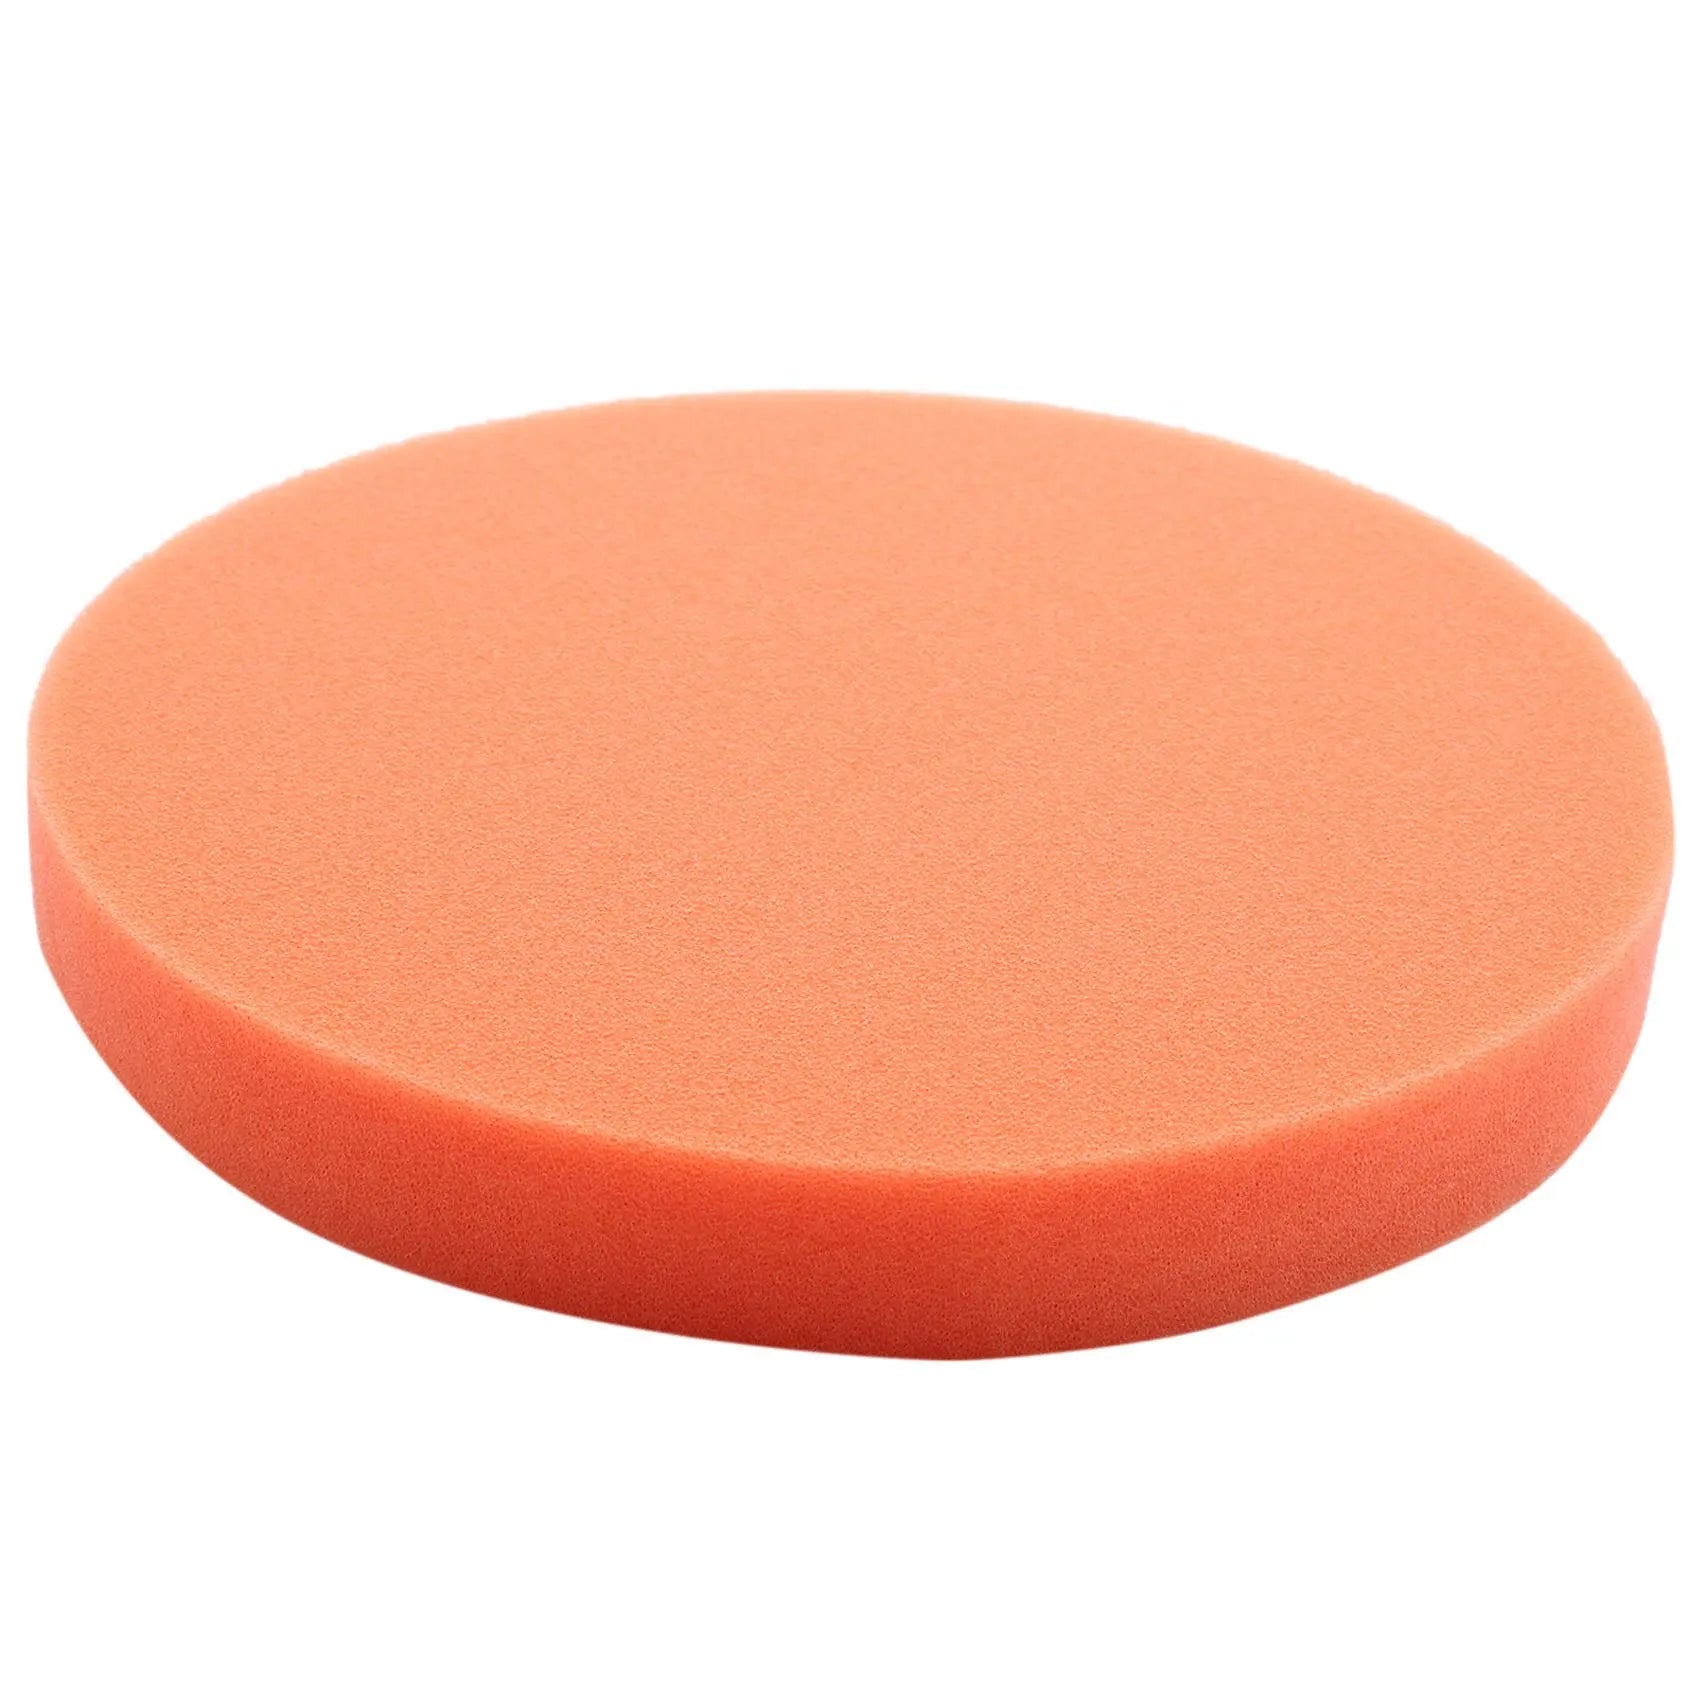 10Pc 180Mm 7 inch Flat Sponge Gross Polishing Buffing Pad Kit for Car Polisher Clean Waxing Auto Paint Maintenance Care